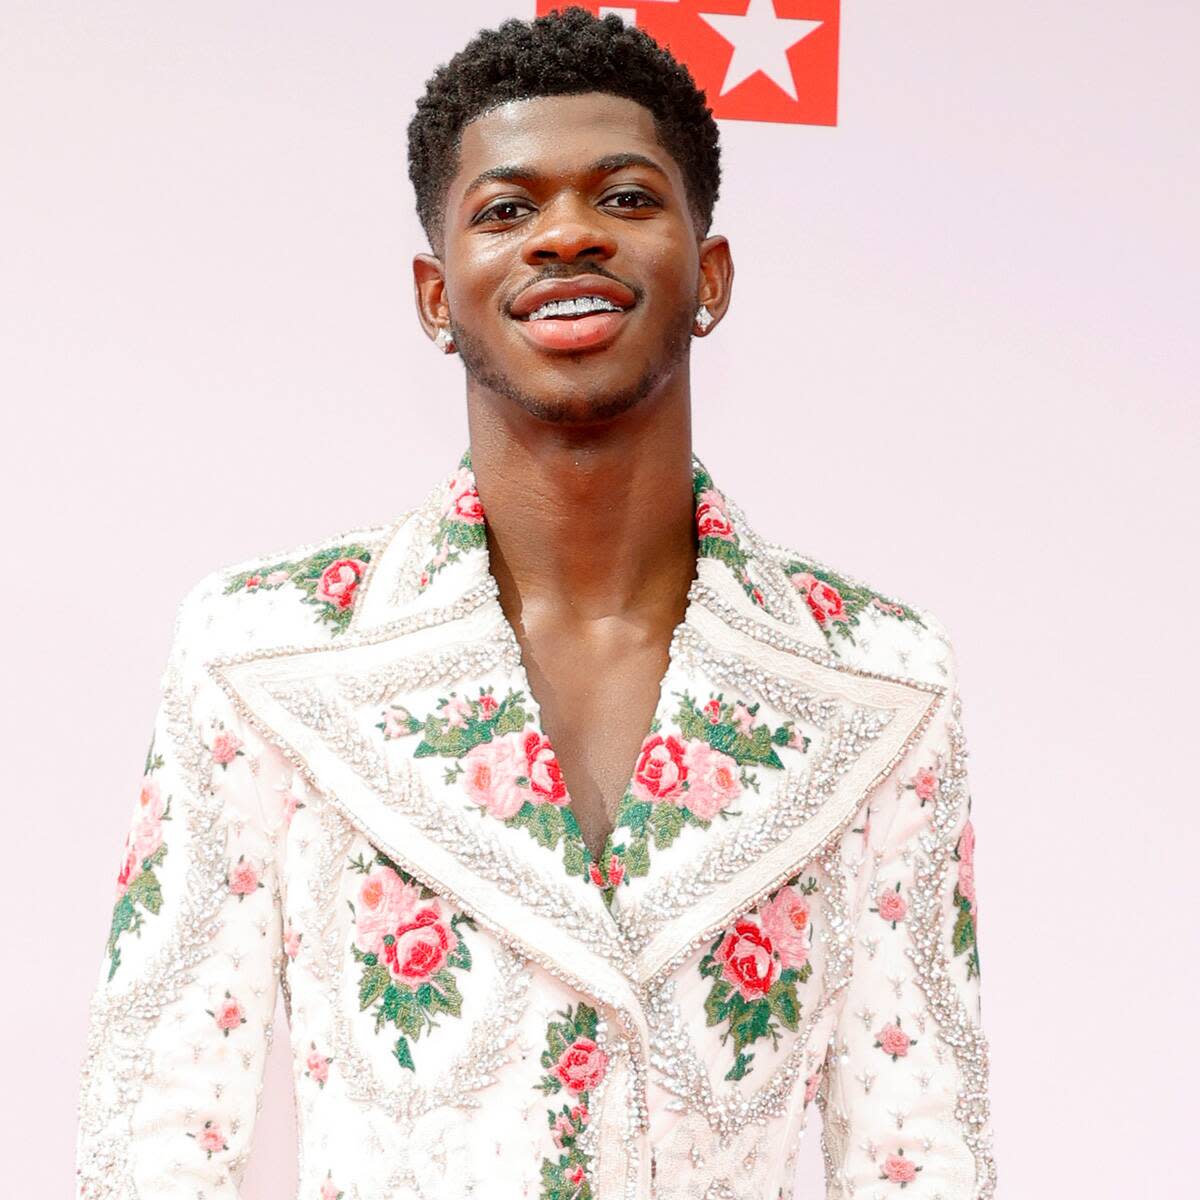 Lil Nas X Reveals He's in a Relationship and Thinks 